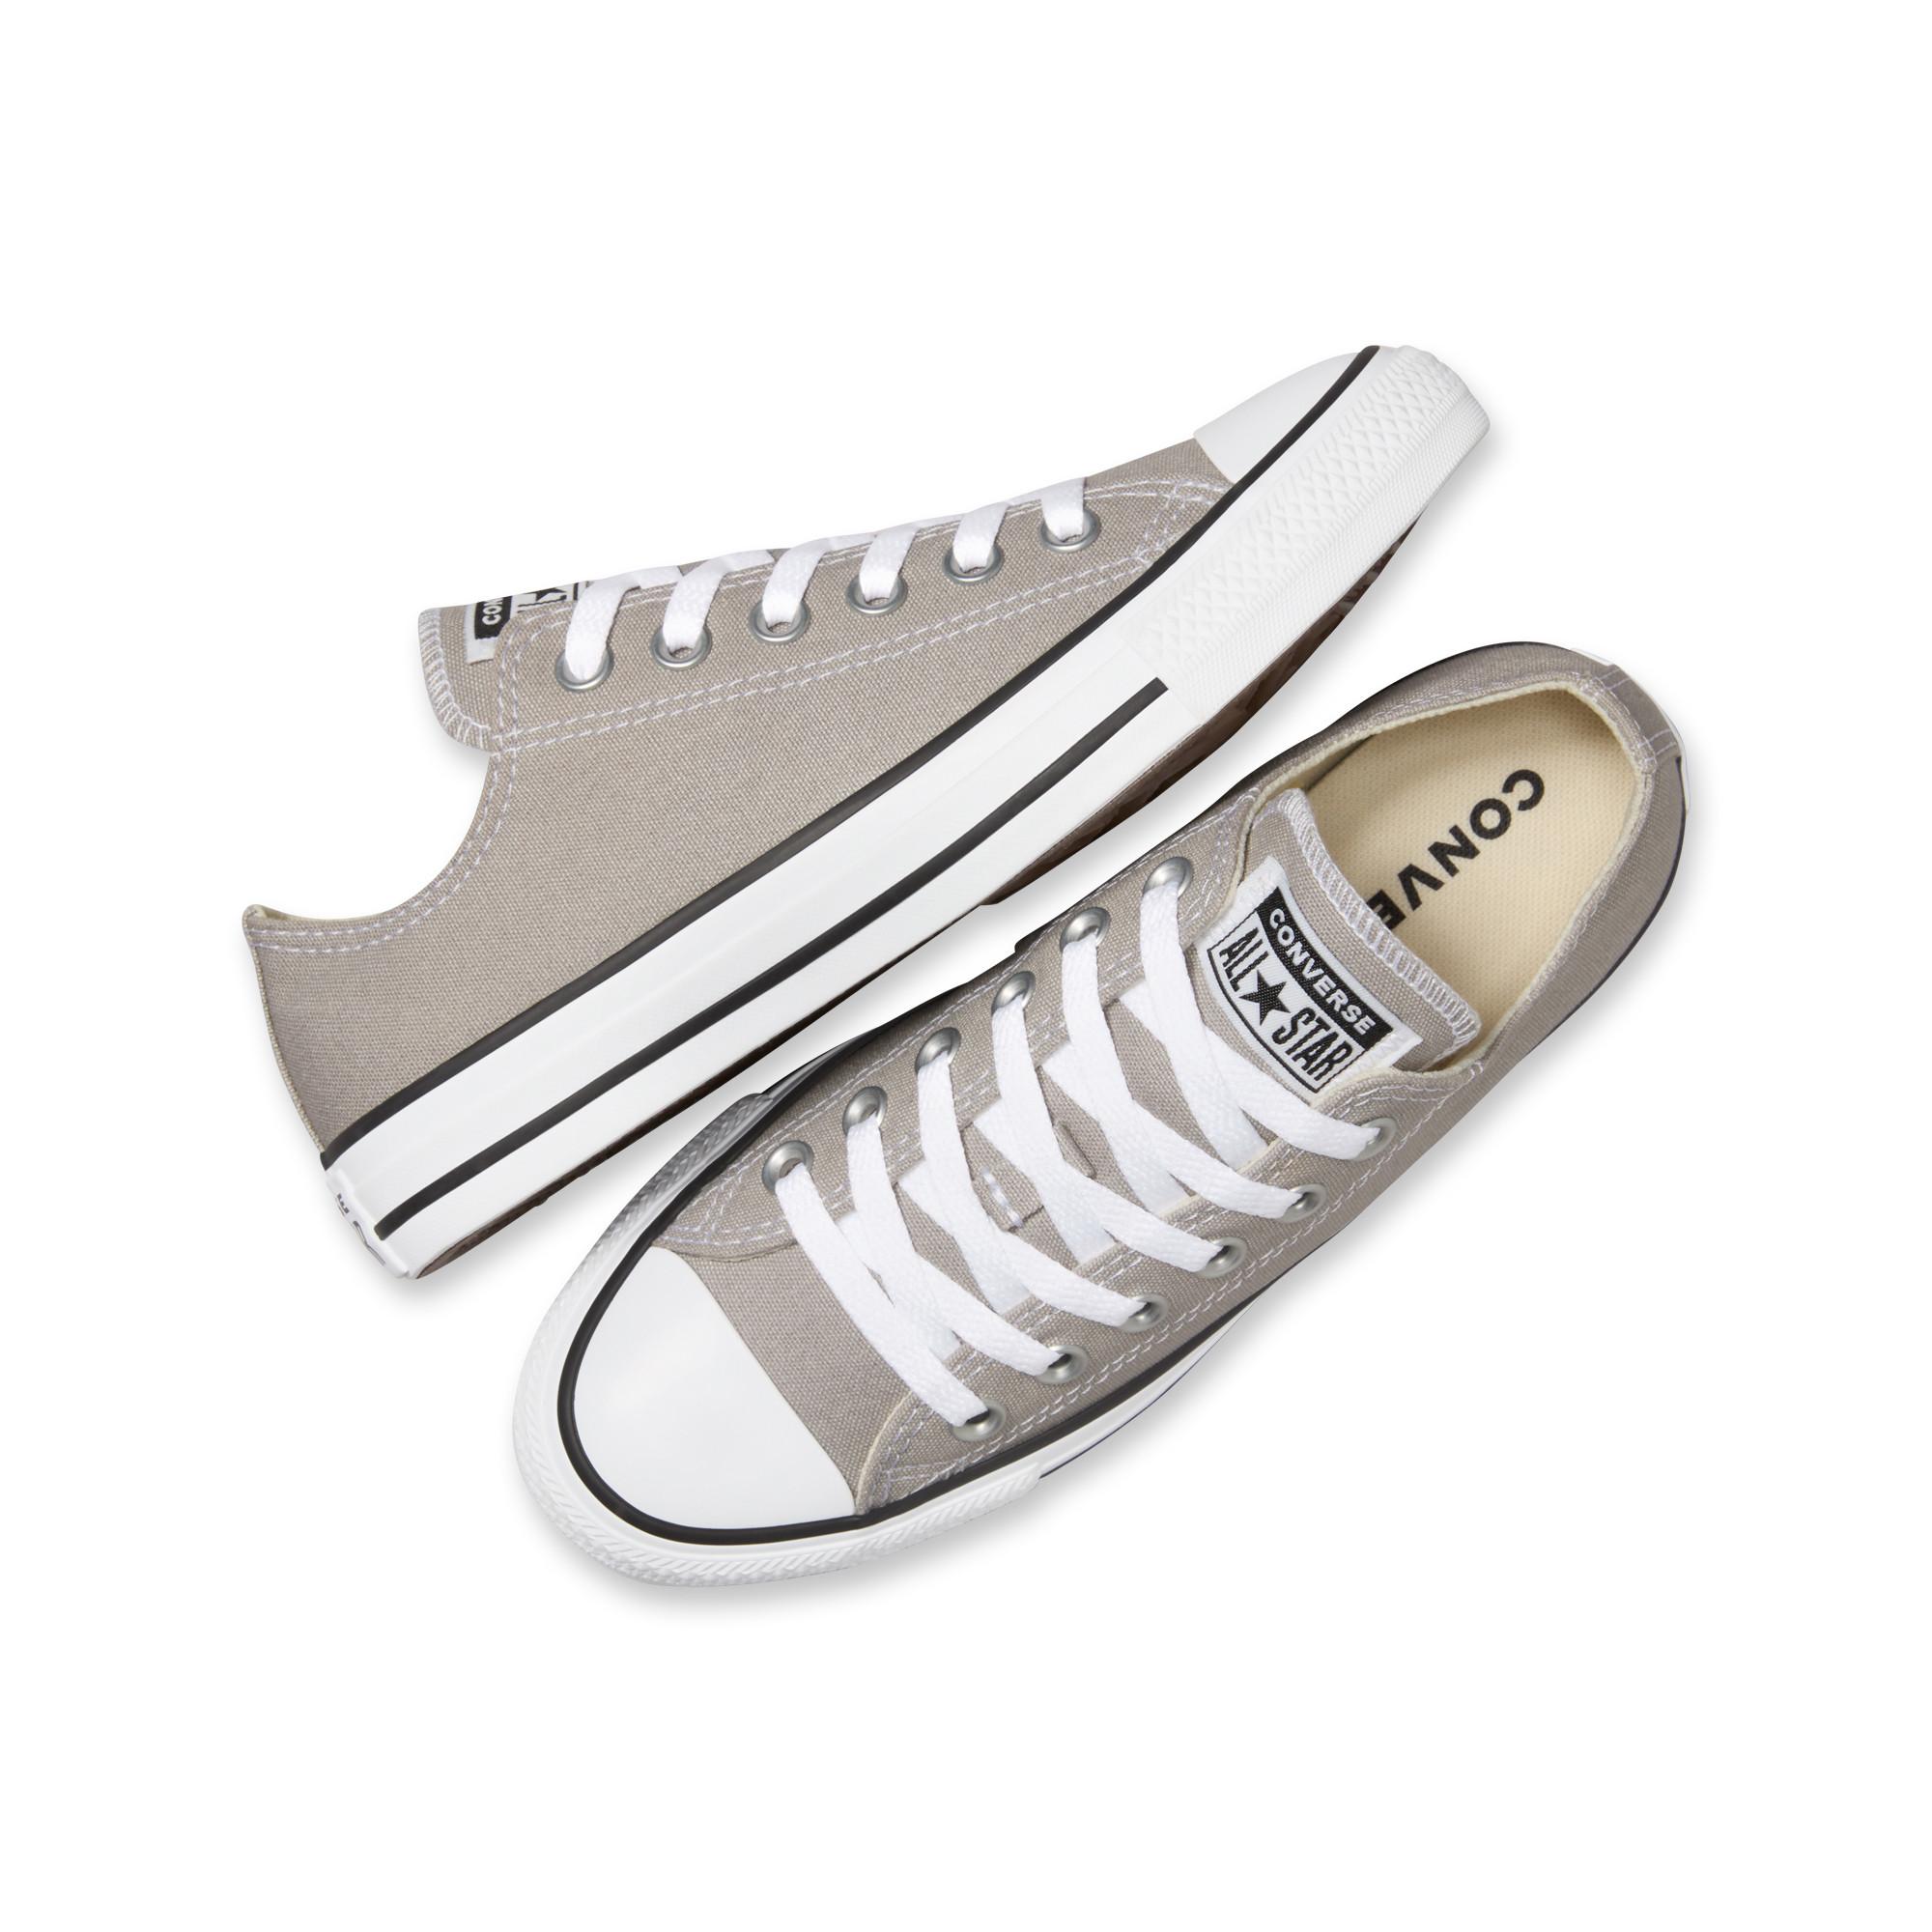 CONVERSE CHUCK TAYLOR ALL STAR Sneakers basse 